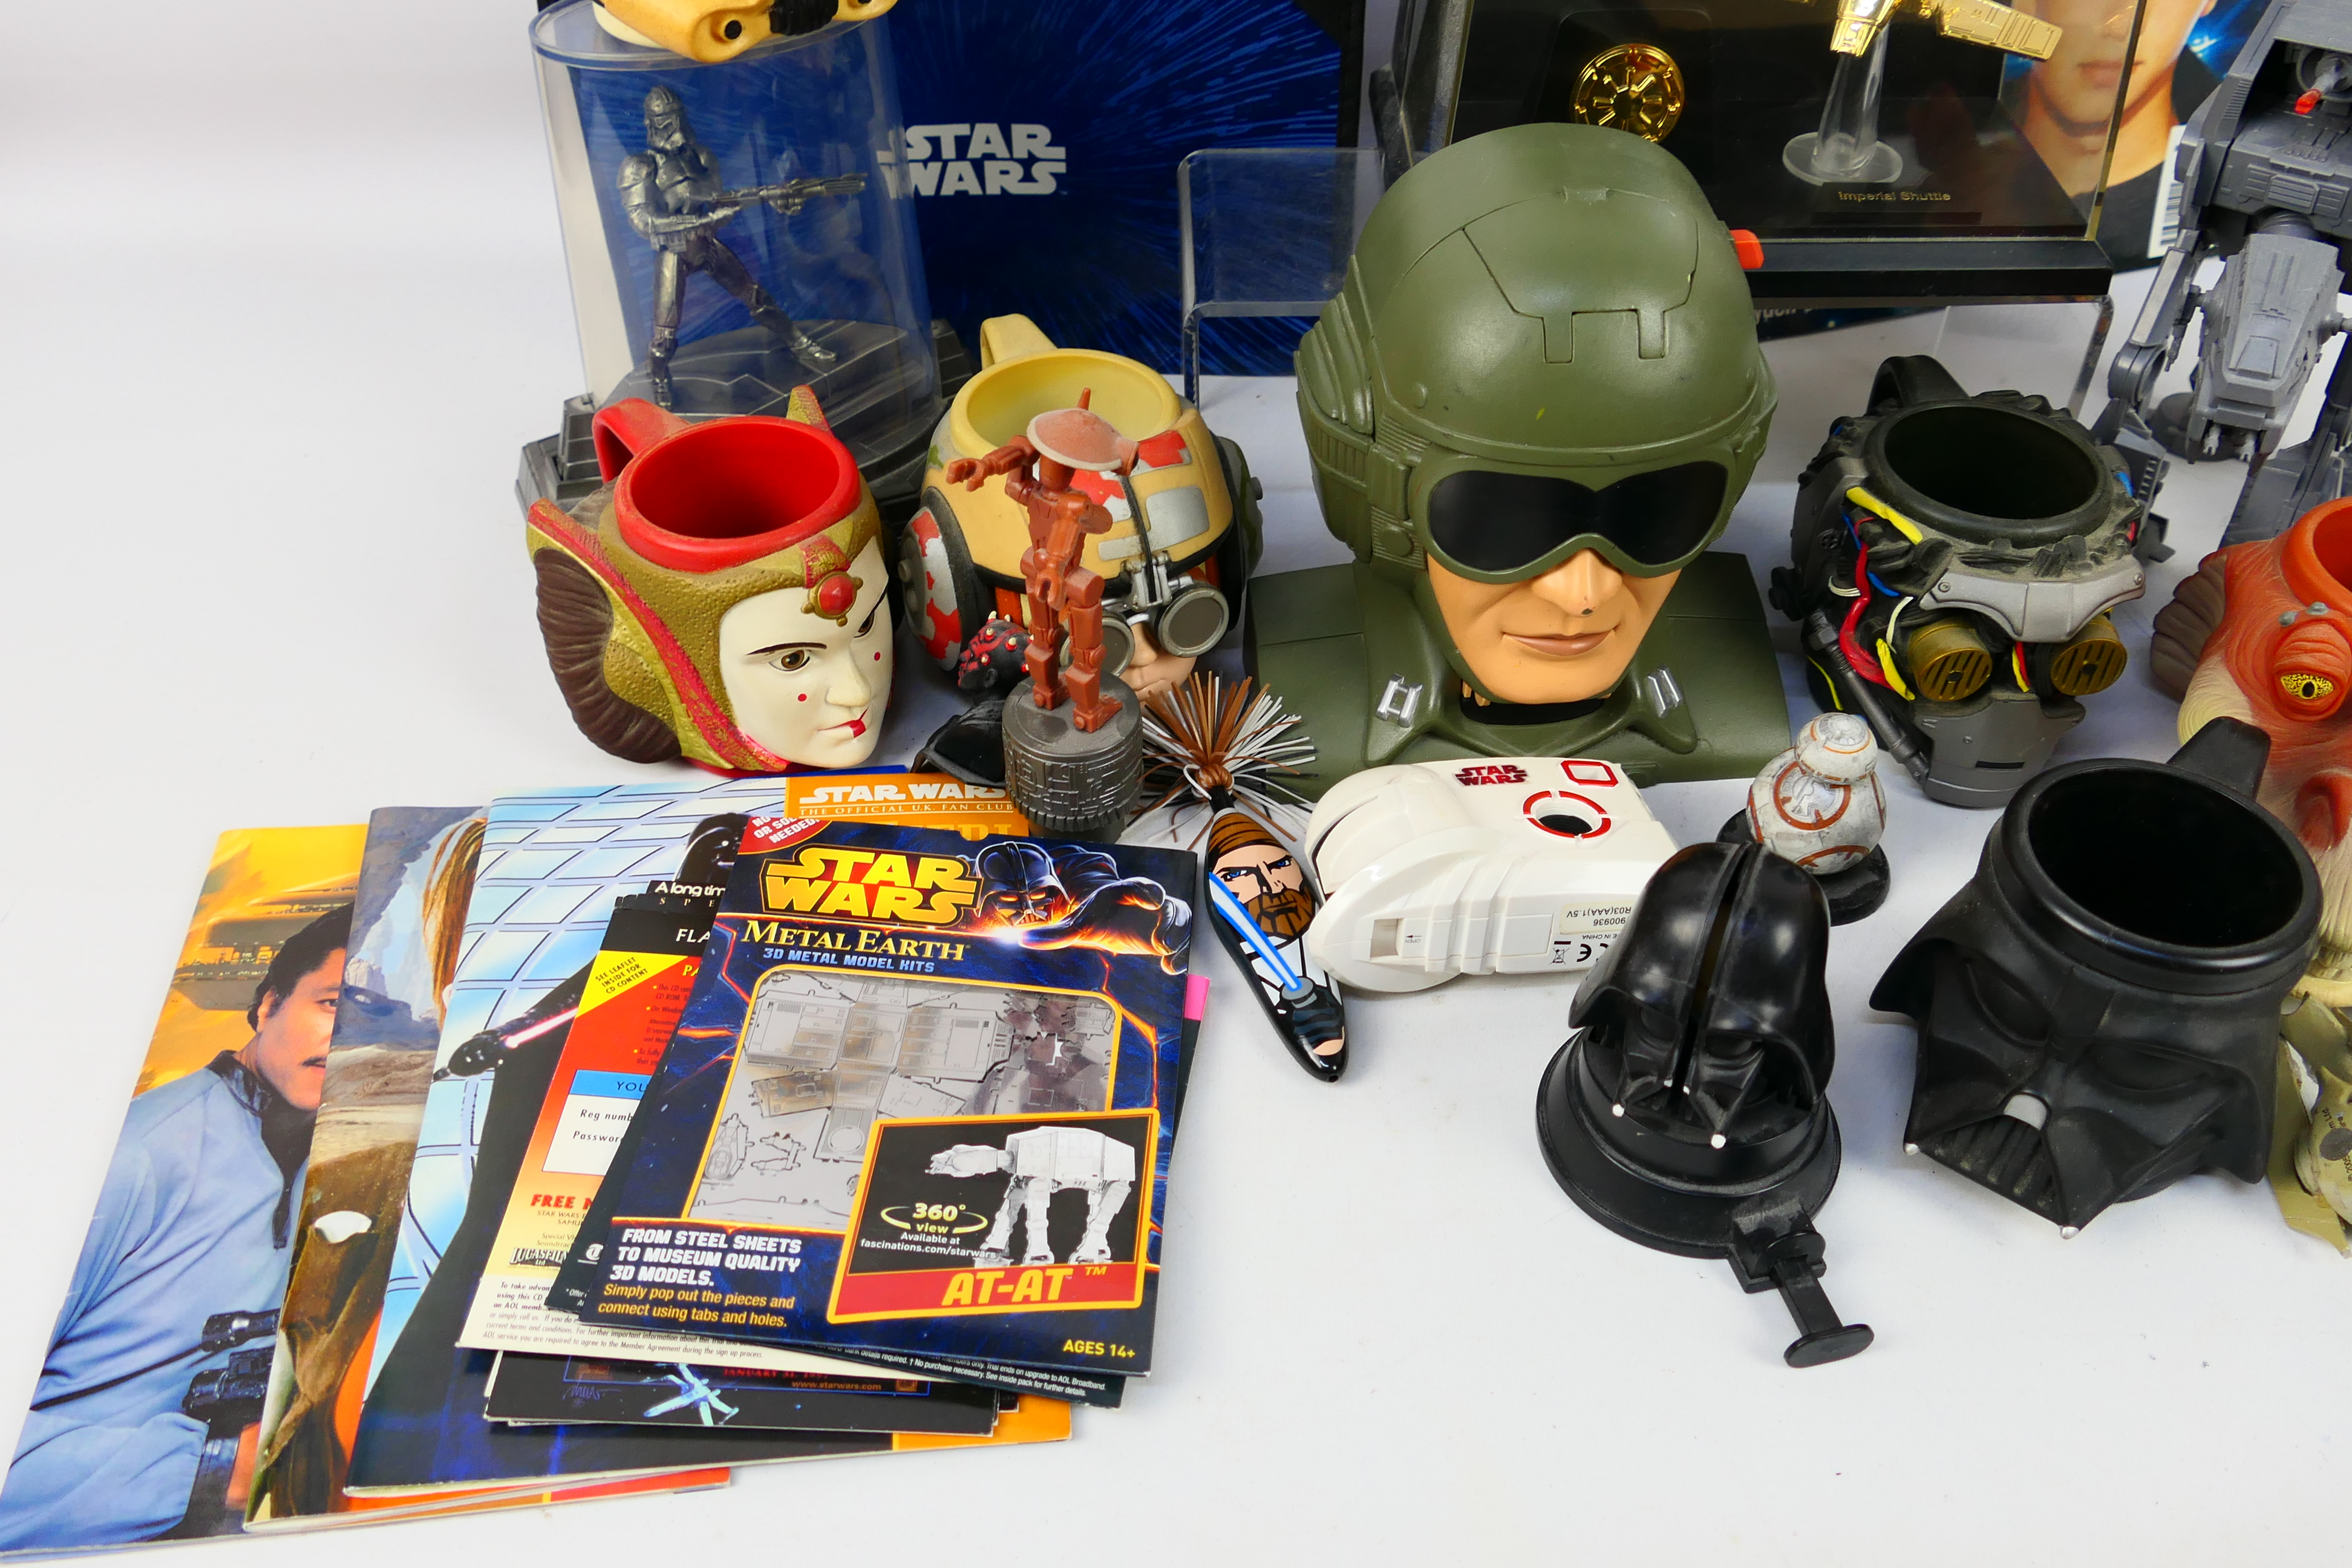 Hasbro - Star Wars - A collection of Star Wars items including 3 x Official Fan Club Journal issues, - Image 3 of 5